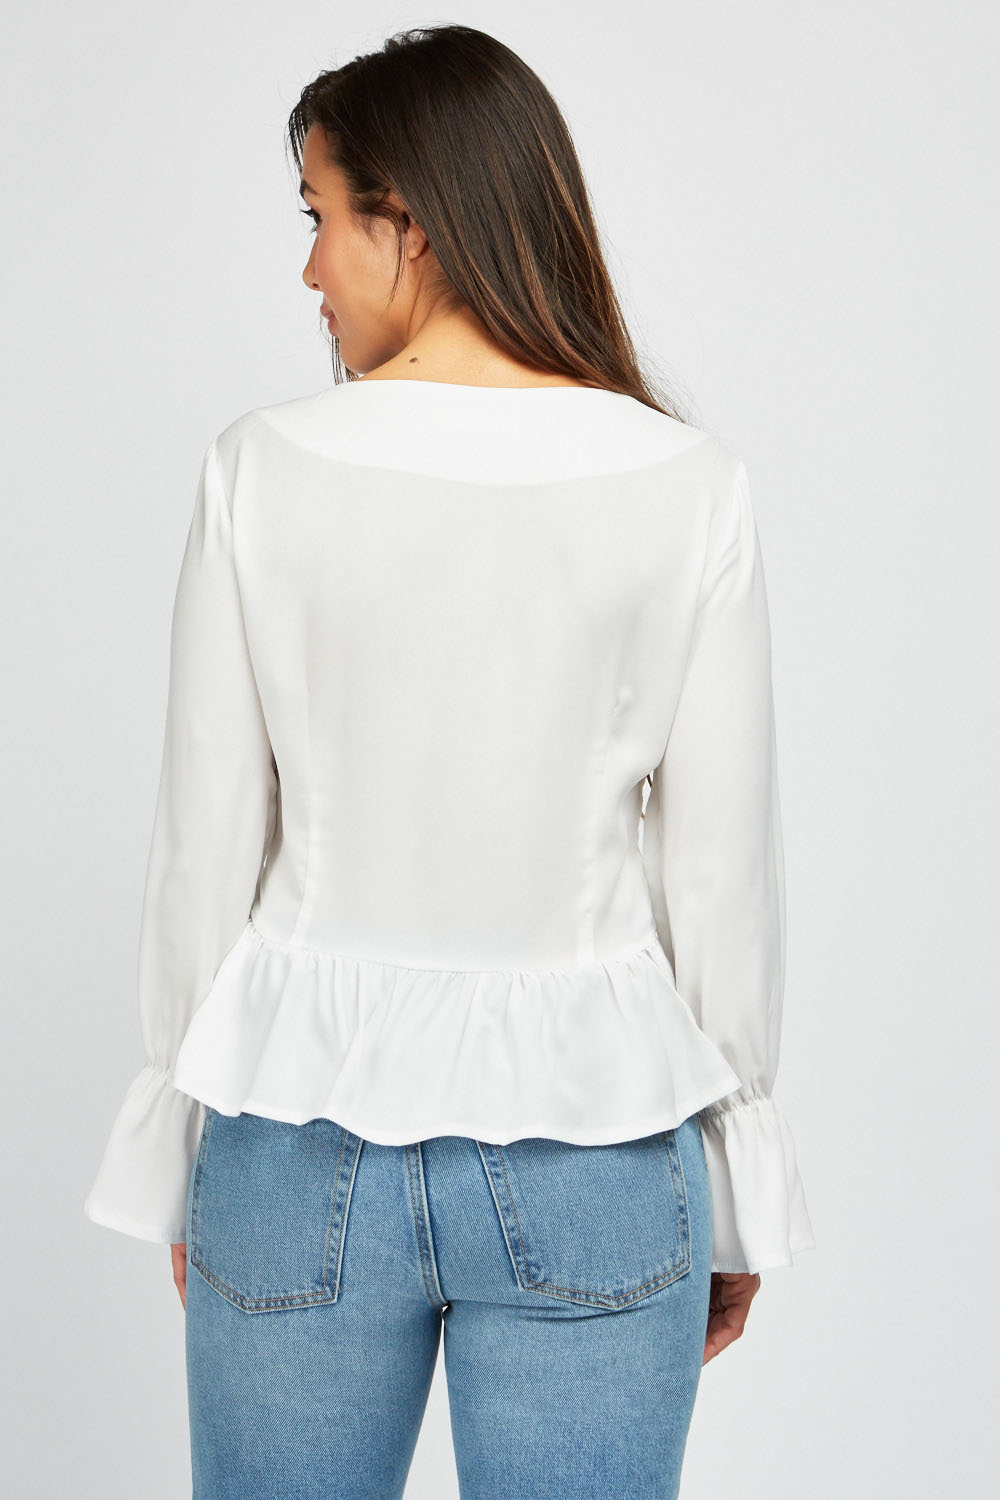 Lace Up Corset Style Blouse - Just $7